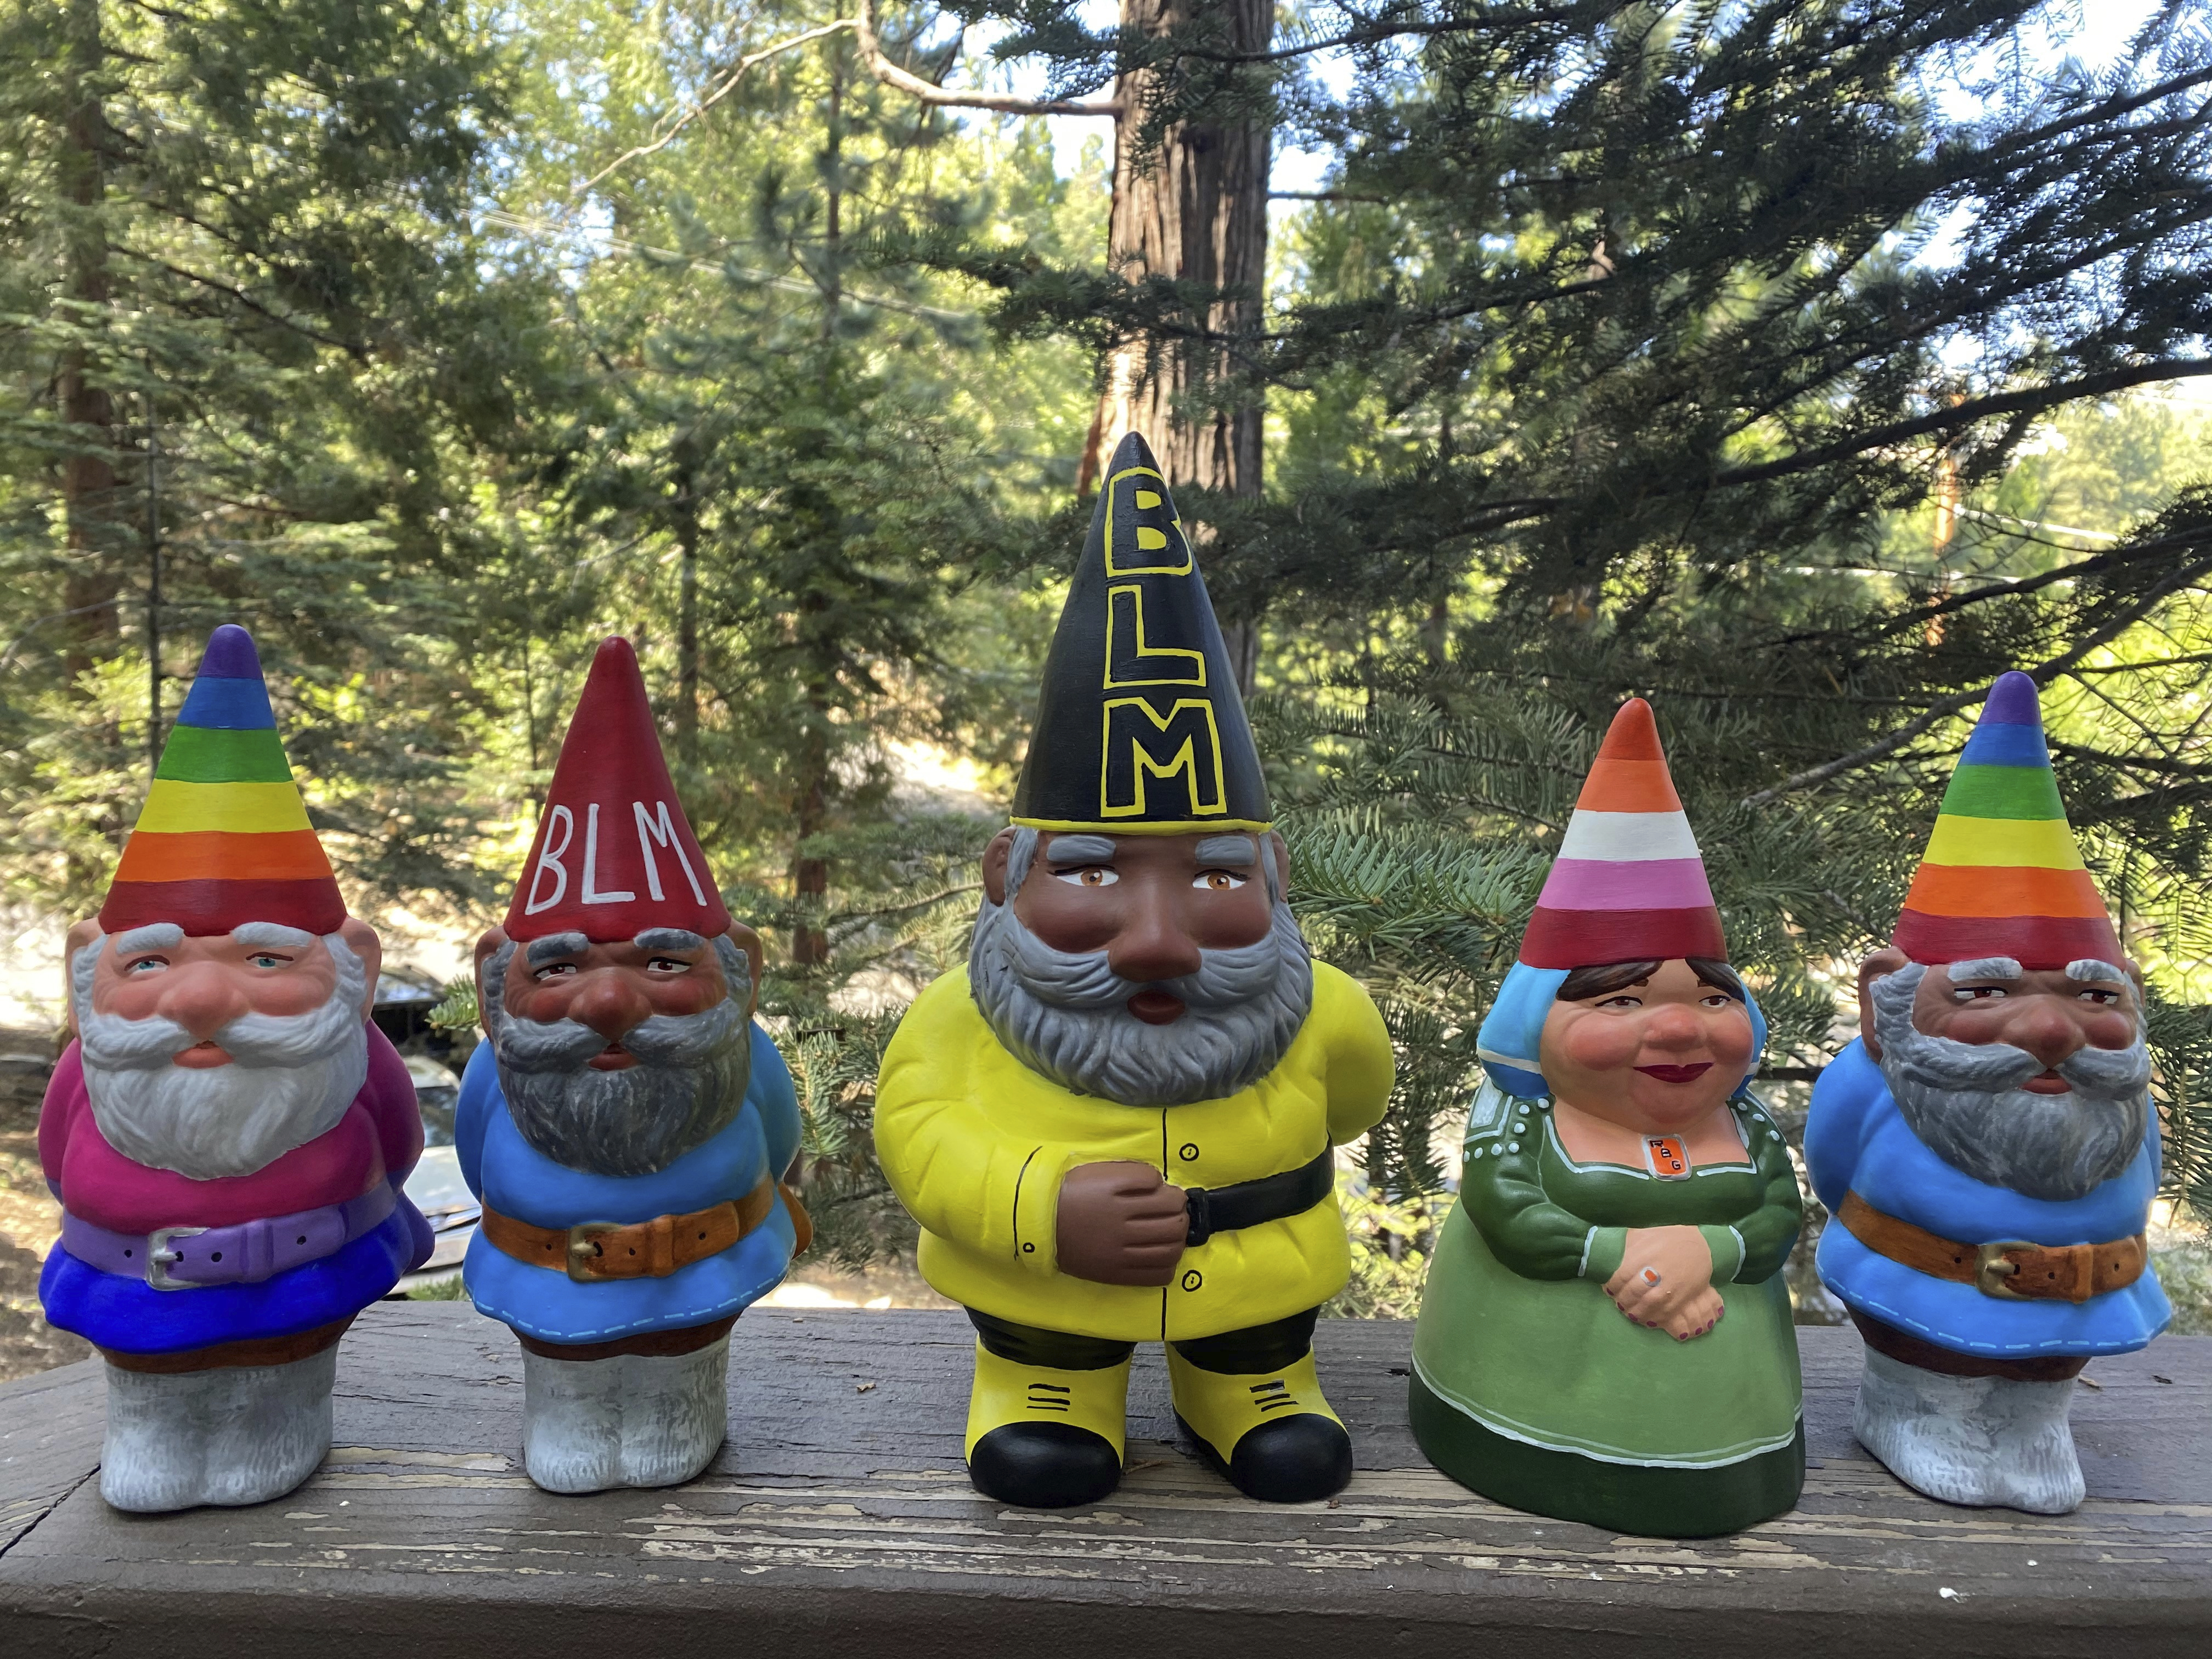 Garden gnome business in legal fight with luxury brand Louis